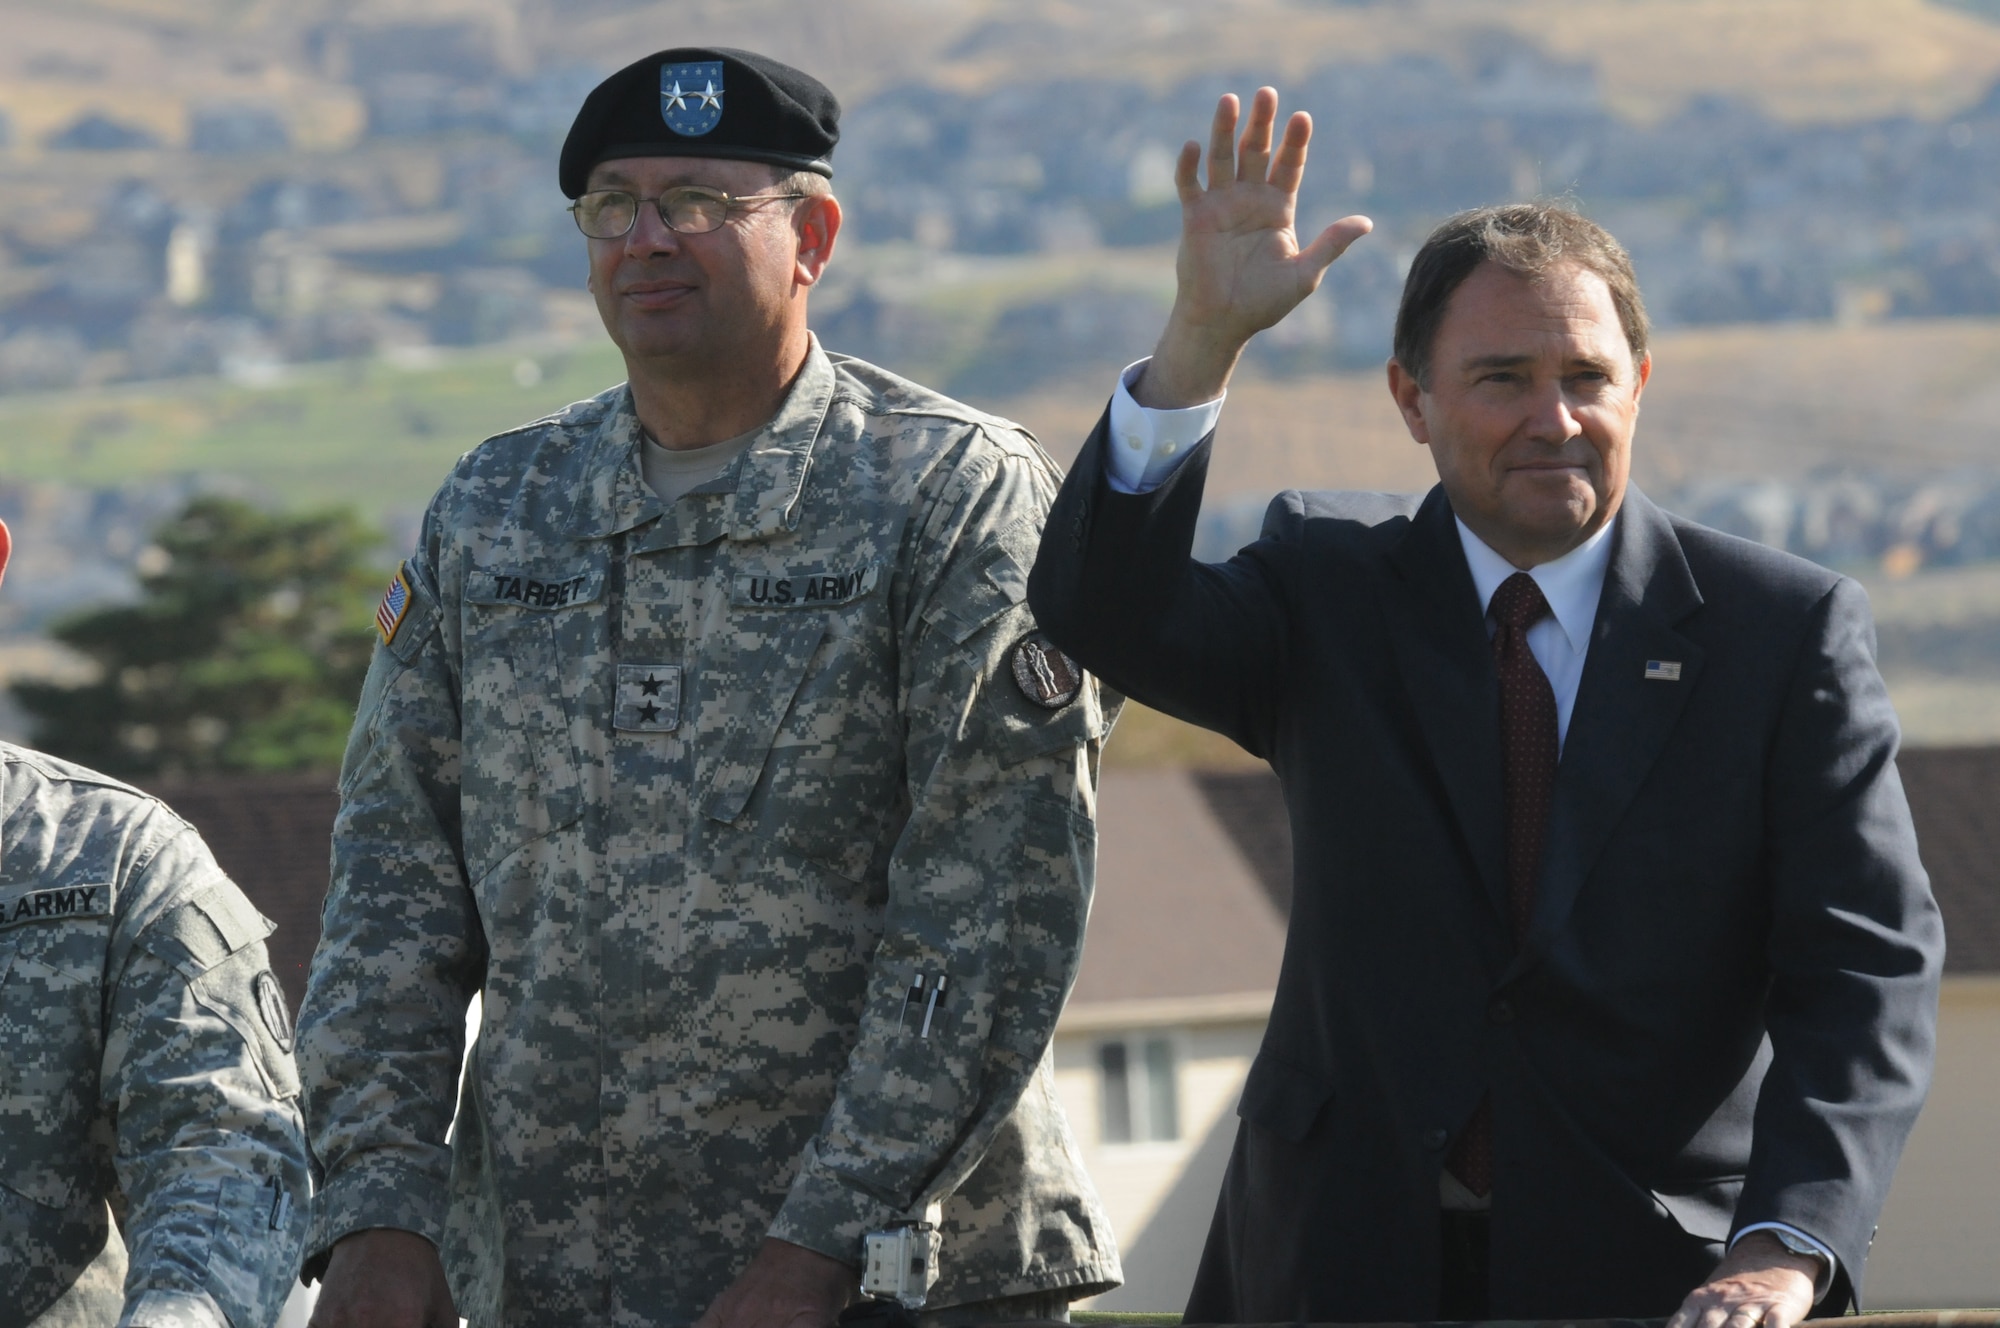 Governor Gary R. Herbert and Major General Brian L. Tarbet inspect the Utah National Guard troops during the Governor's Day parade Sept. 17.  (U.S. Air Force photo by Technical Sergean Kelly K. Collett)(RELEASED)